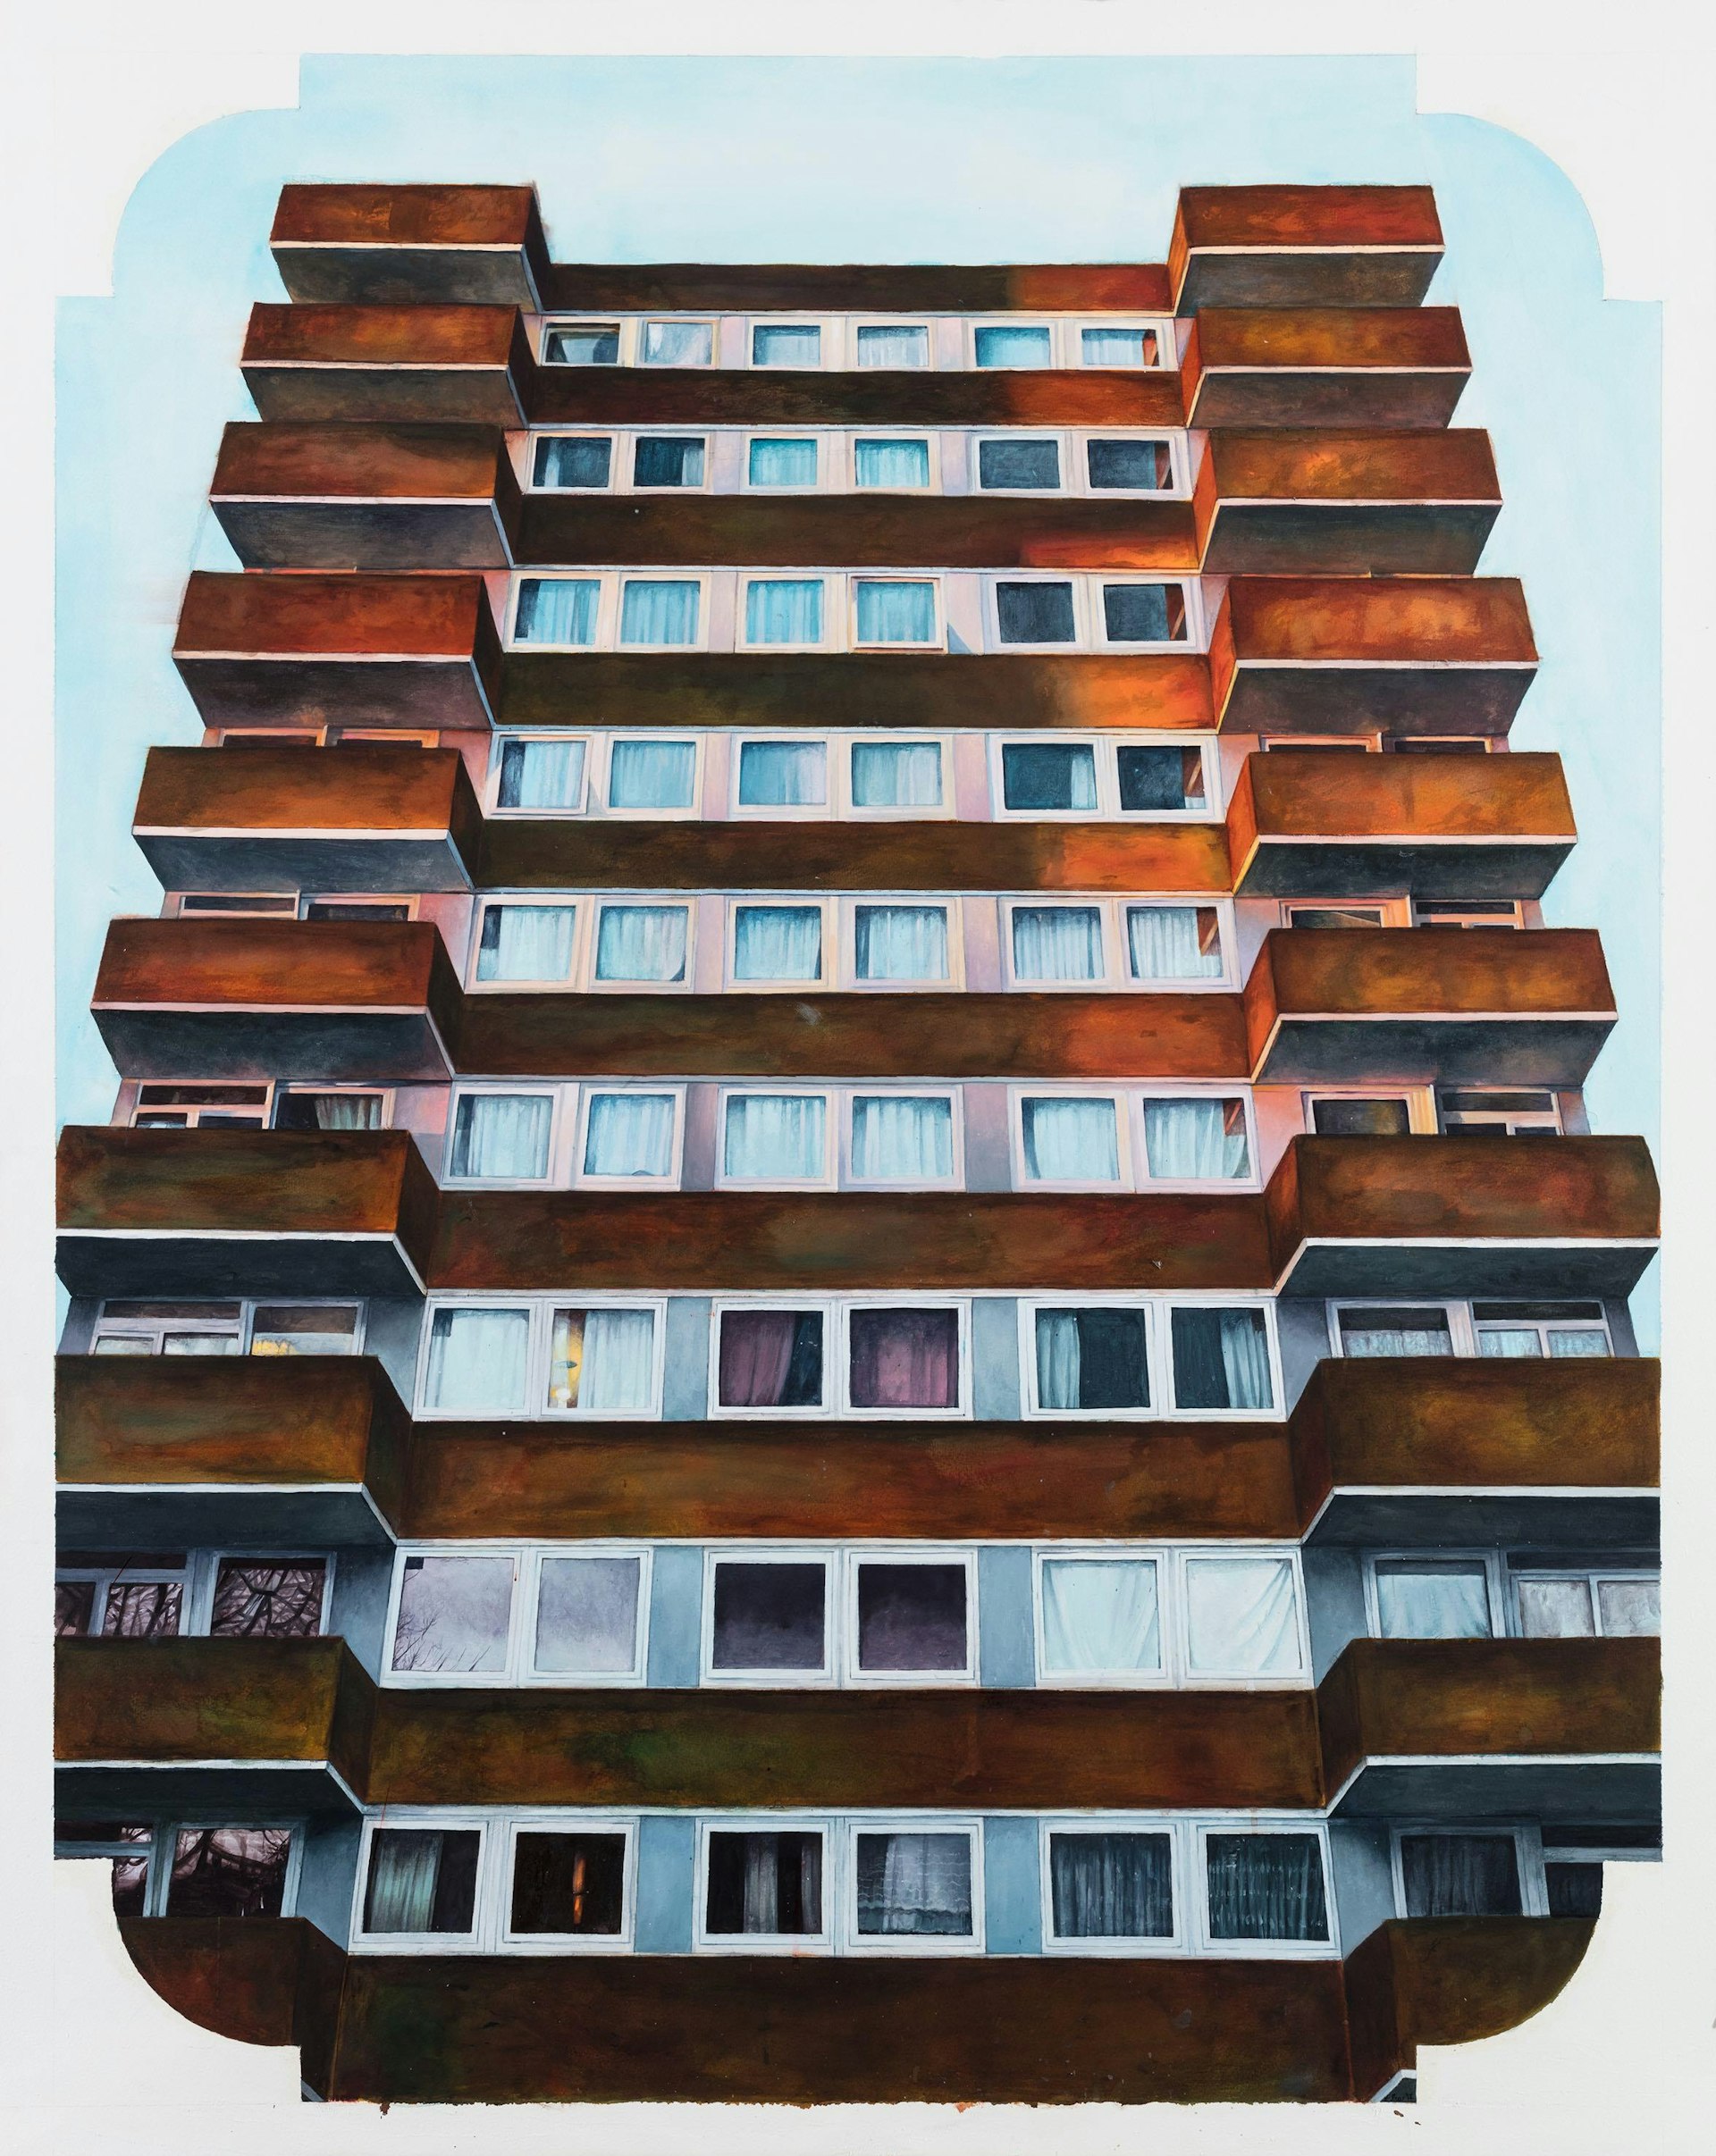 A visual homage to the architecture of east London